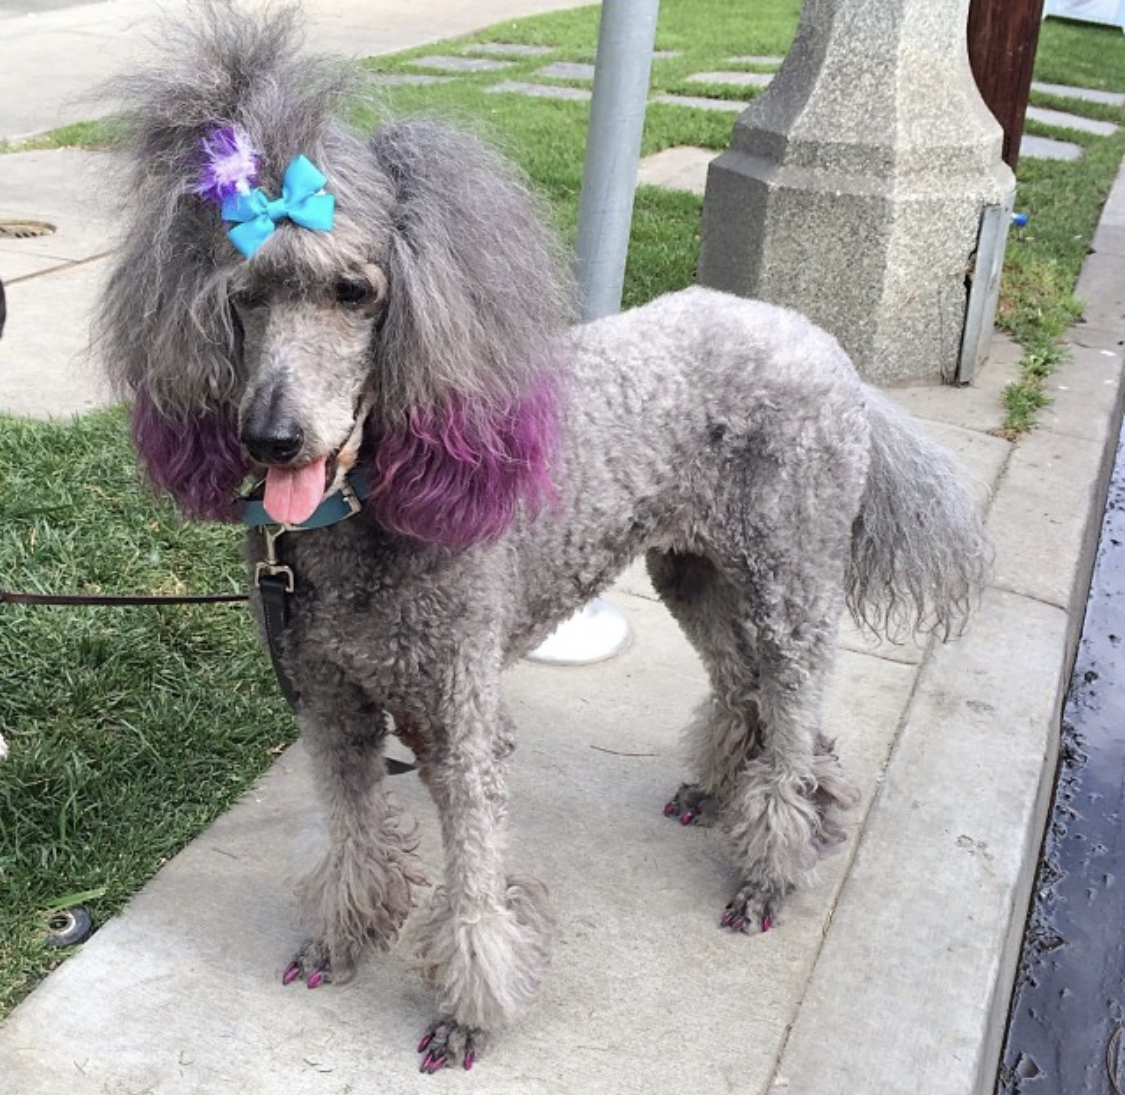 A Poodle with gray and purple fur standing on the pavement